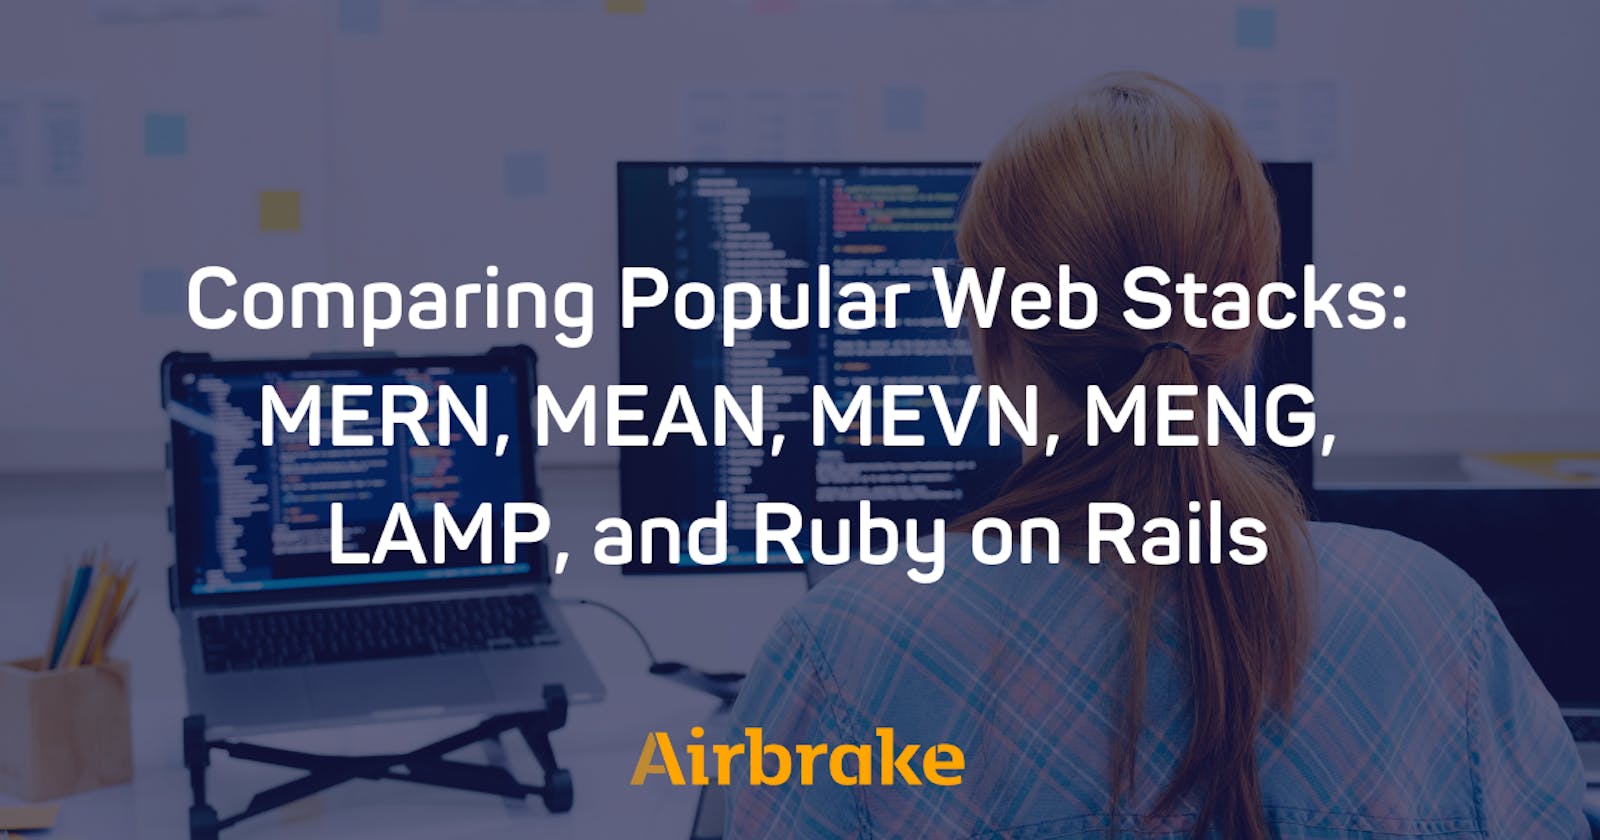 Comparing Popular Web Stacks: MERN, MEAN, MEVN, MENG, LAMP, and Ruby on Rails